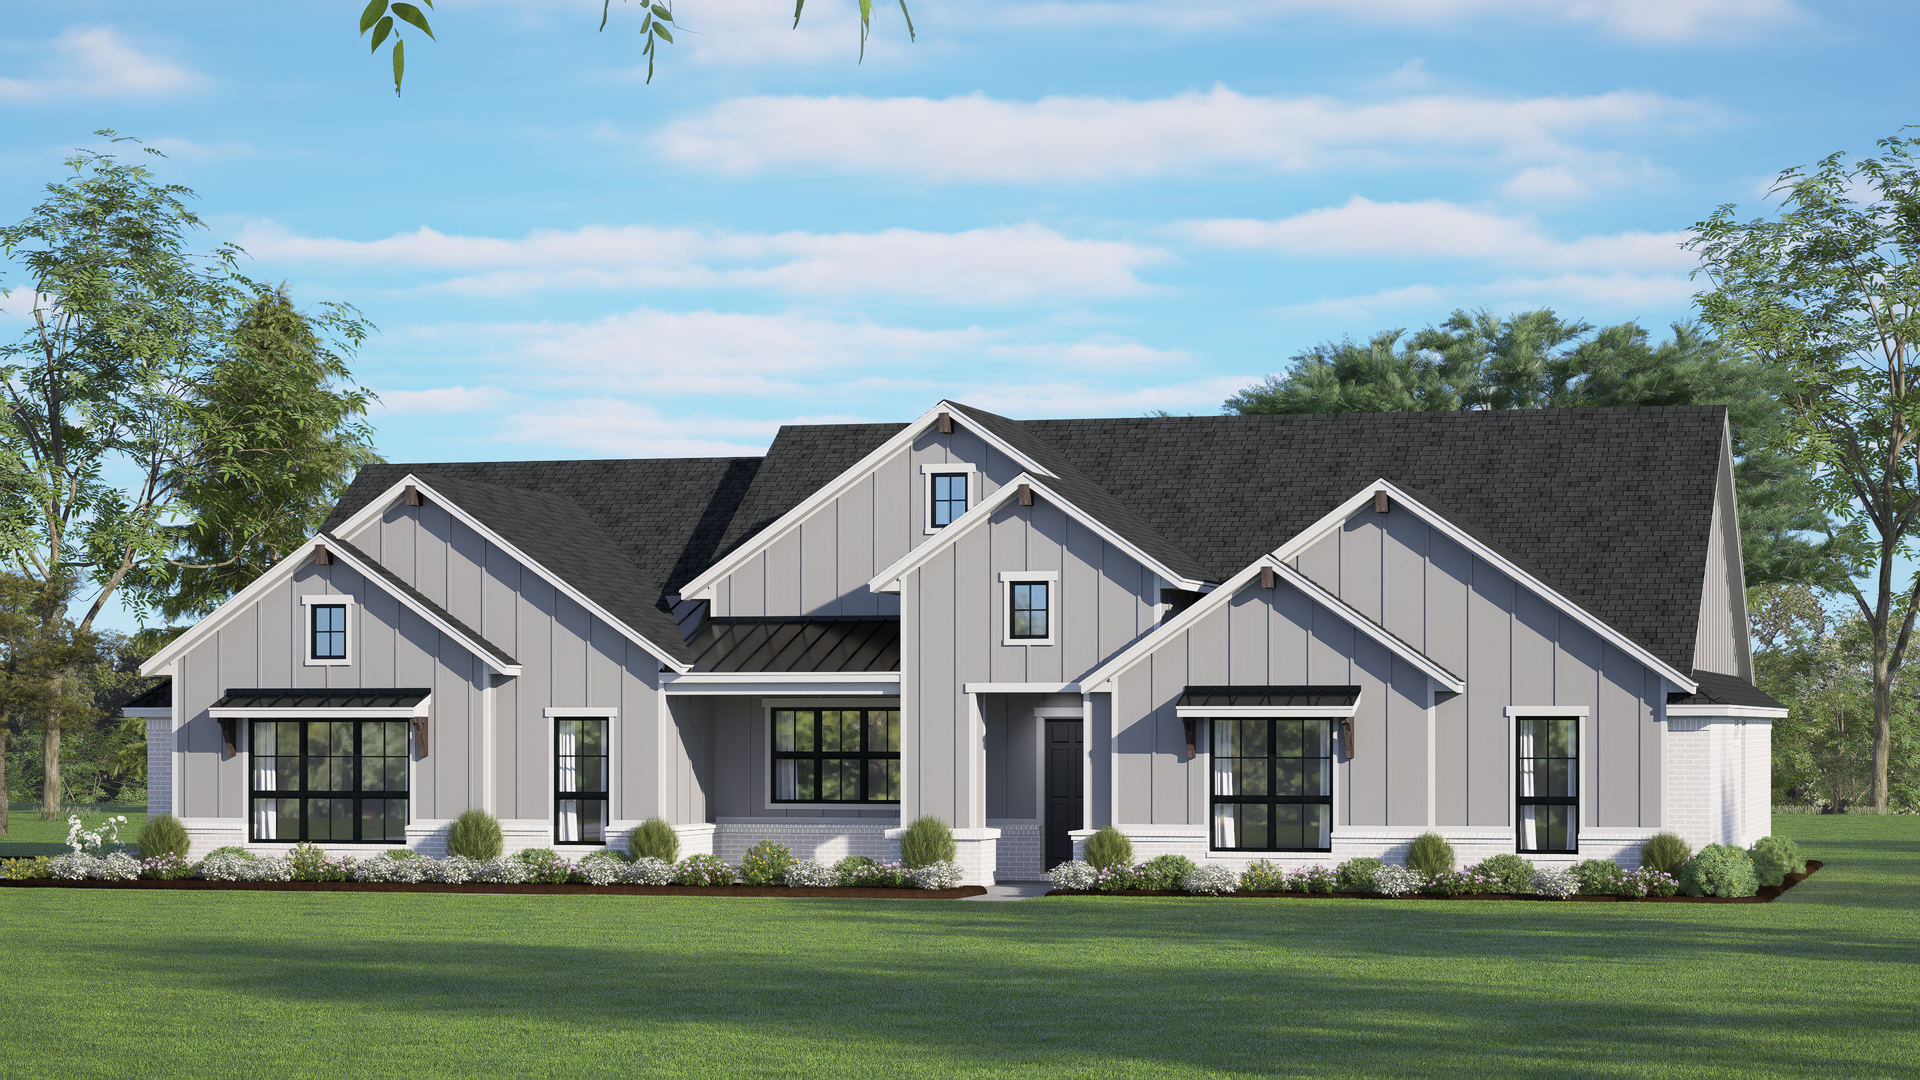 2797 D-Stone. 2,797sf New Home